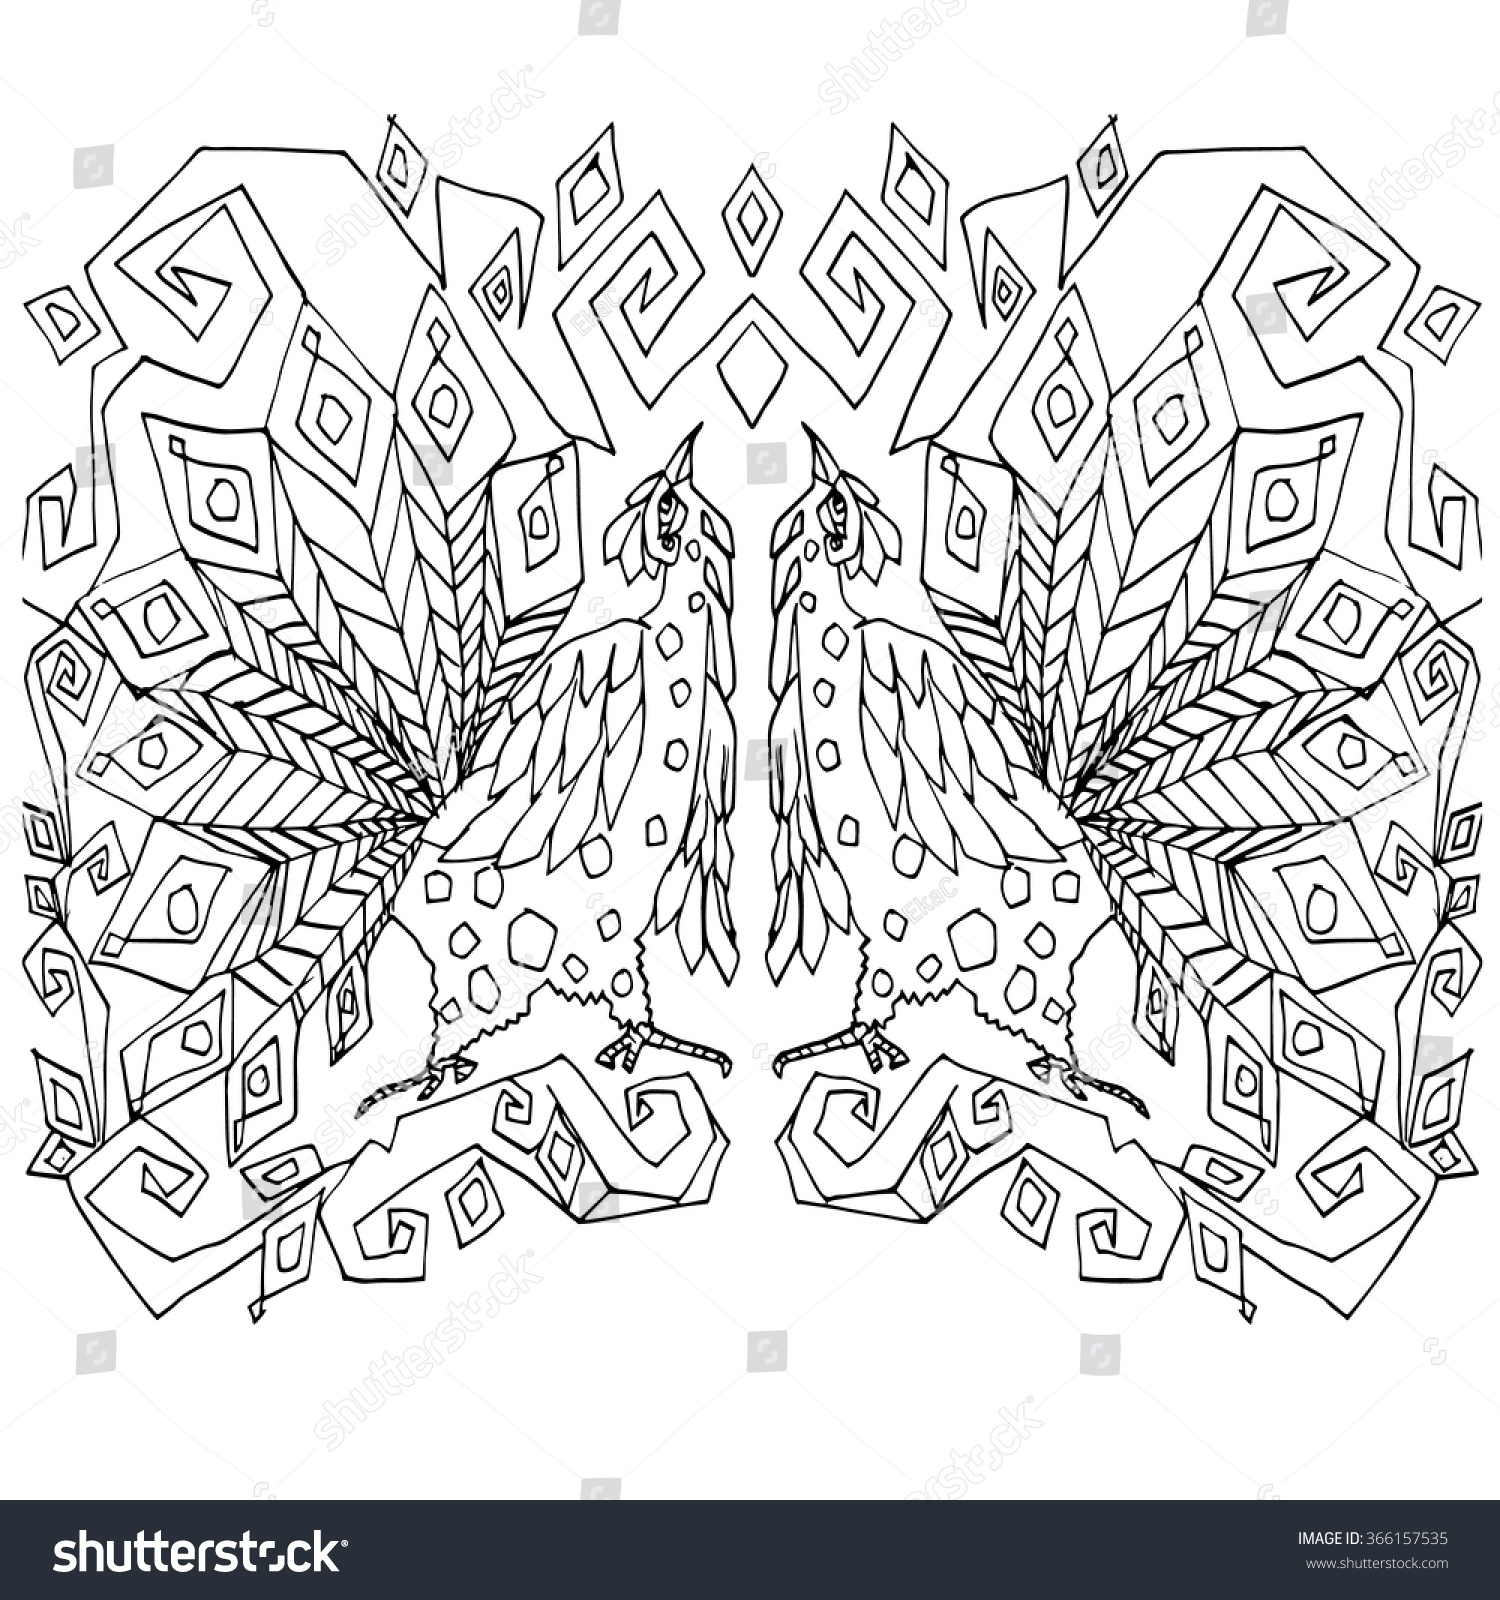 Adult coloring page turkey bird couple dancing detailed decorative design in folk art style